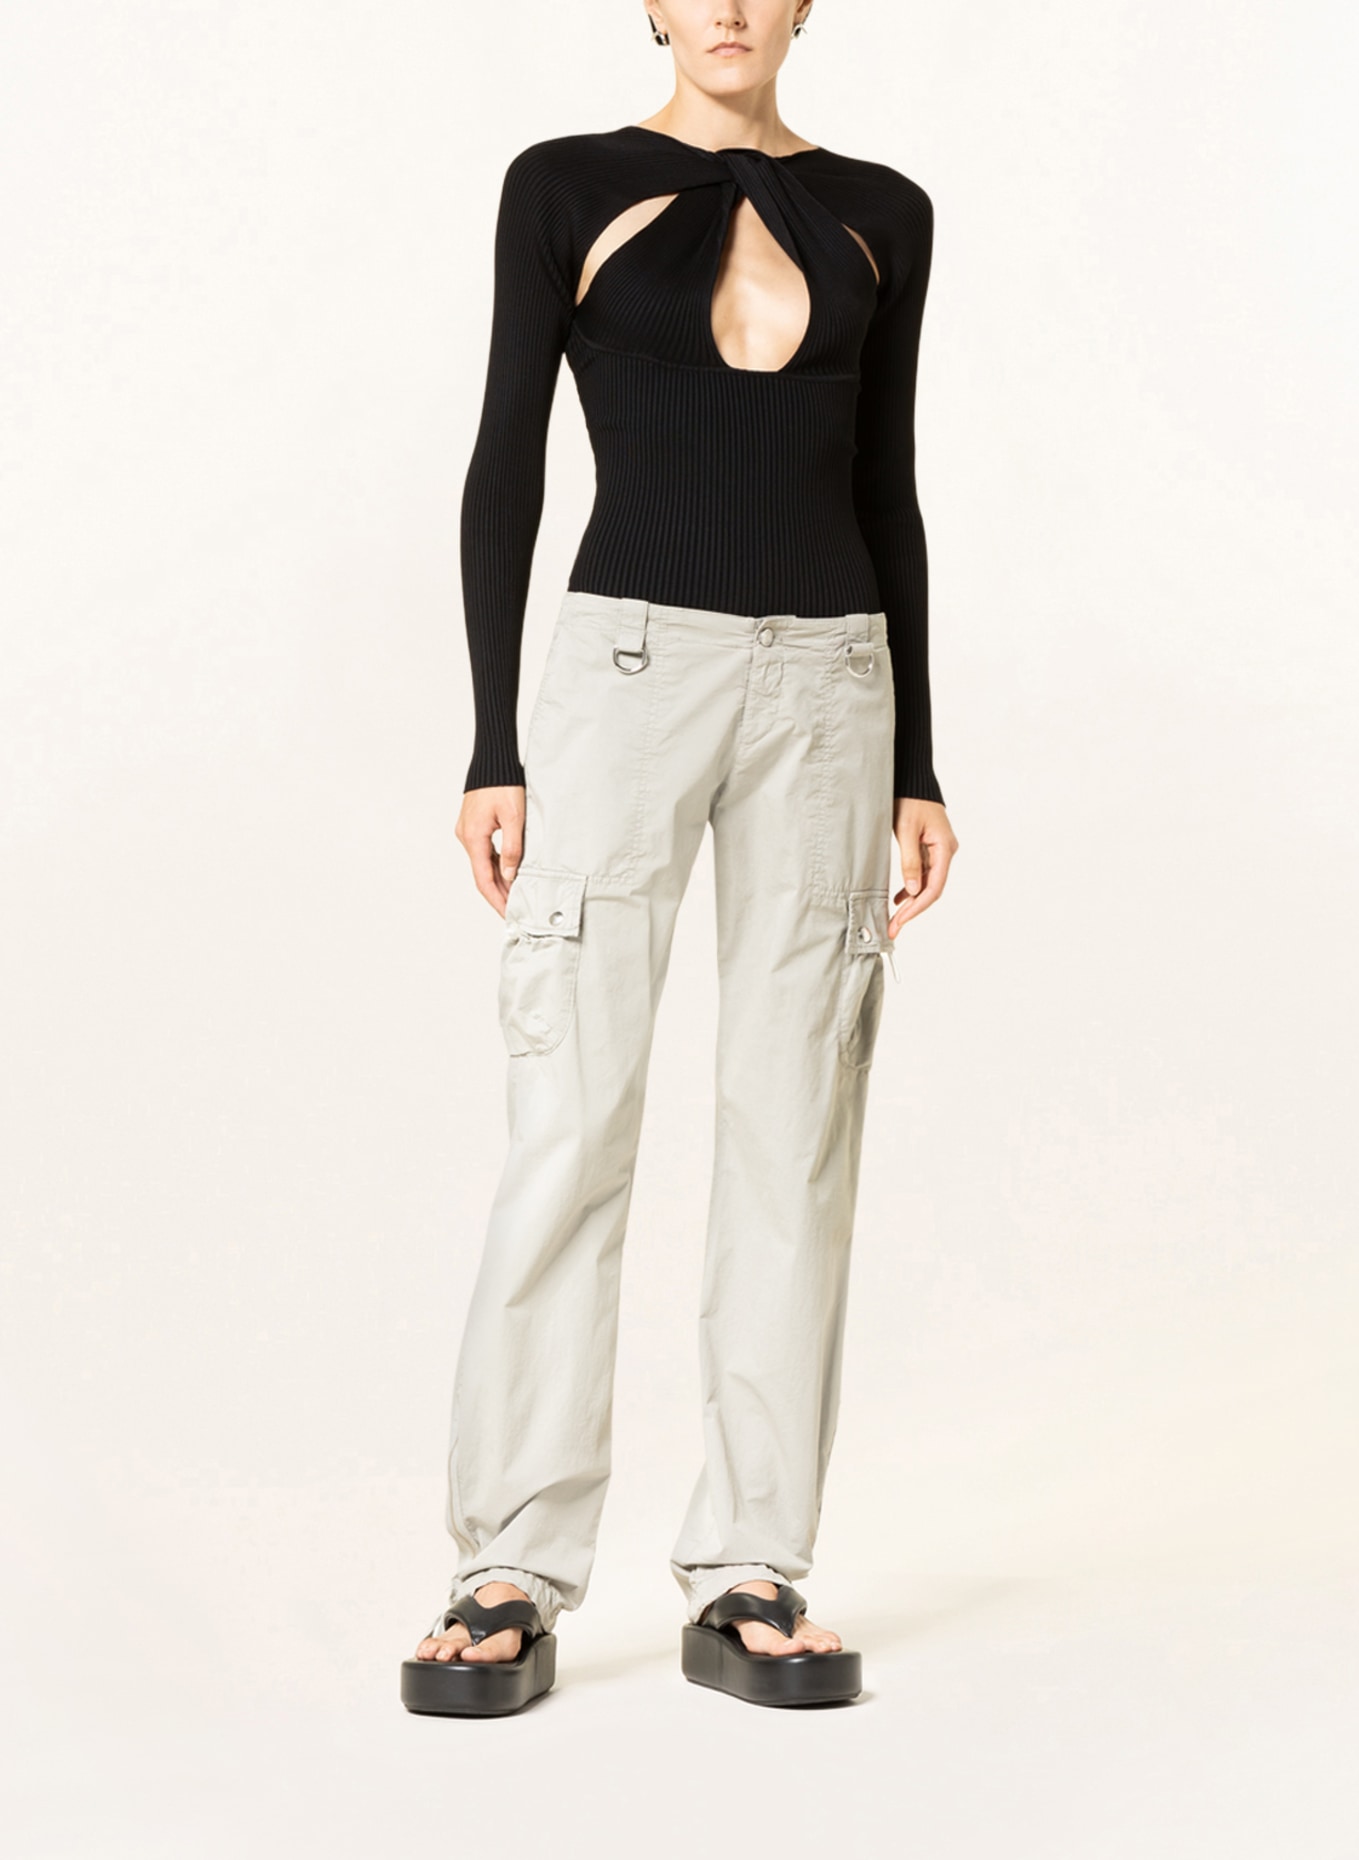 coperni Sweater with cut-out, Color: BLACK (Image 2)